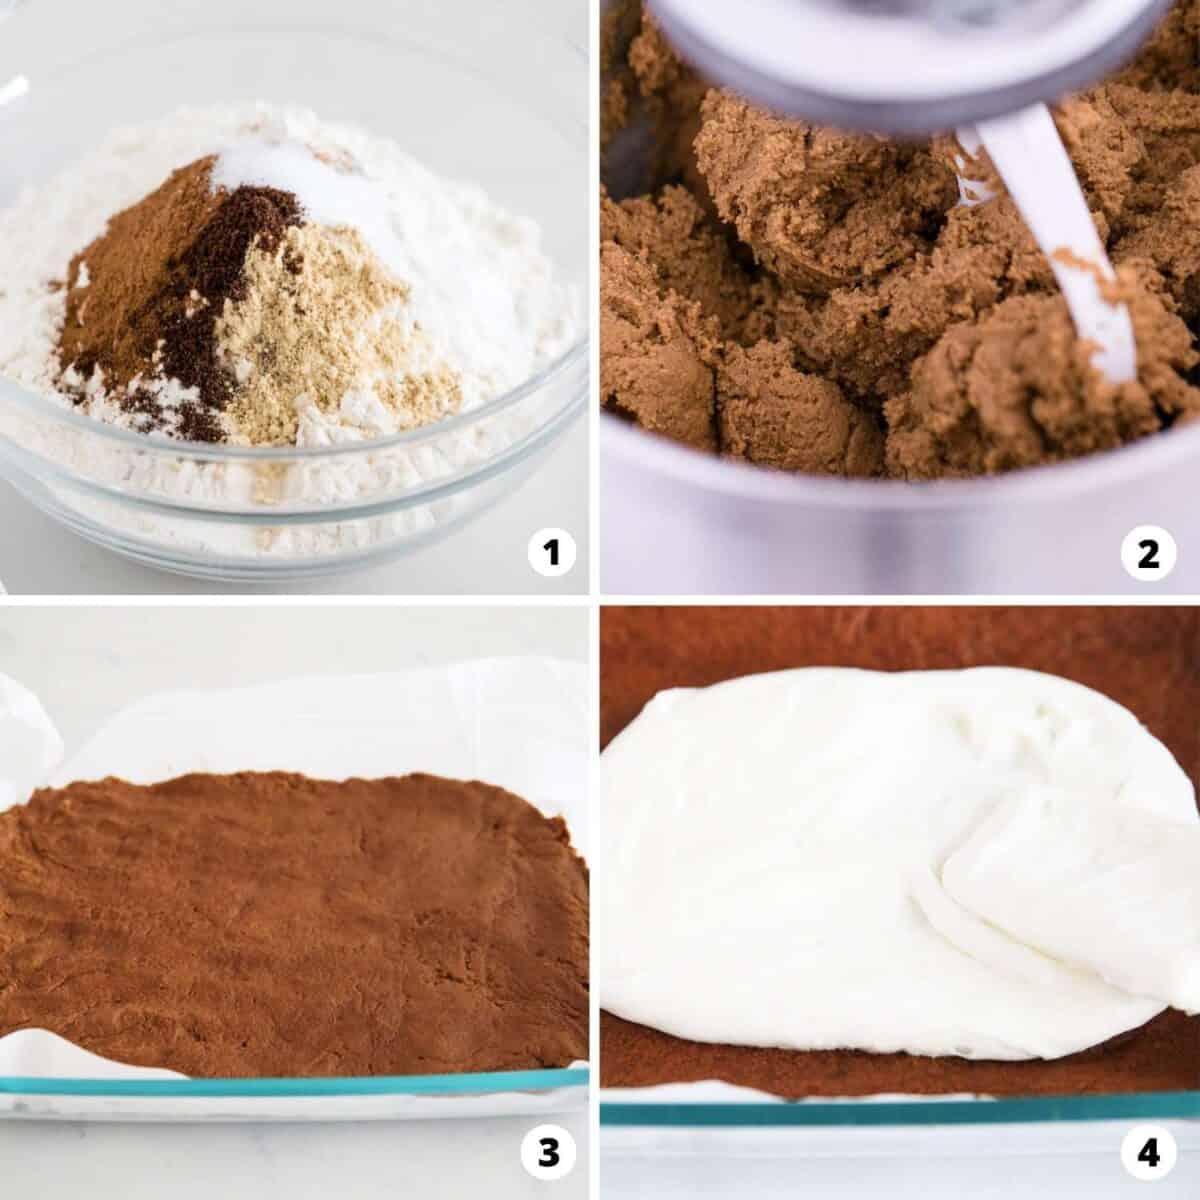 Showing how to make gingerbread bars in a 4 step collage.